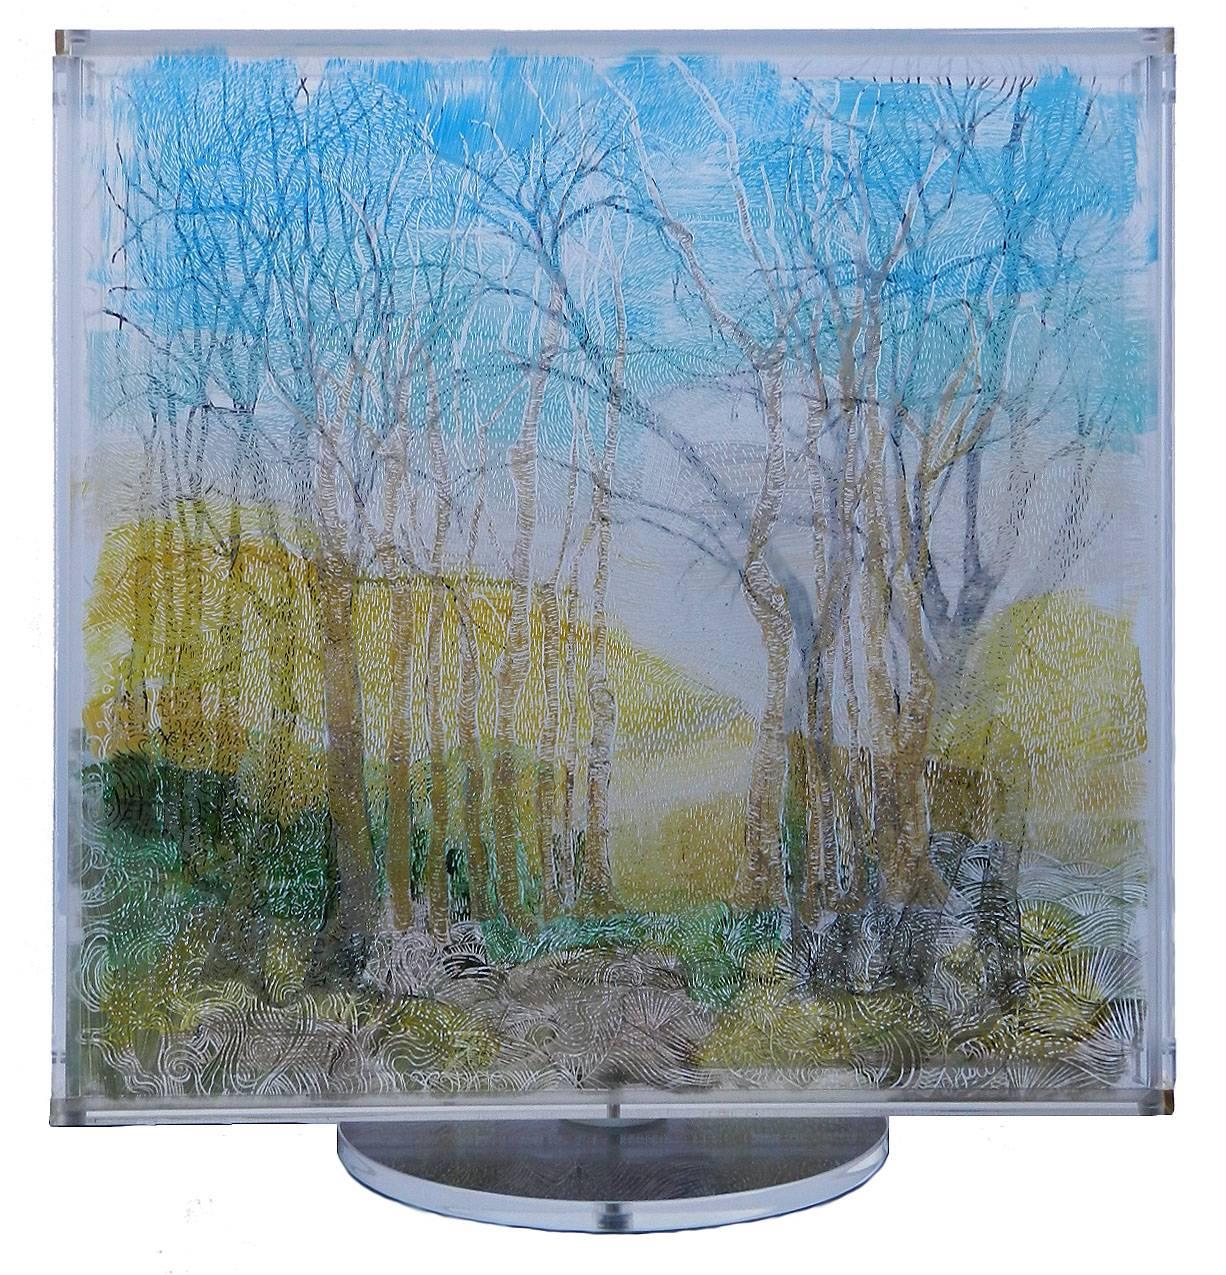 Foret Eternale Kinetic Revolving Sculpture 3D Painting on clear plastic - Gray Still-Life Sculpture by Perez Petriarte